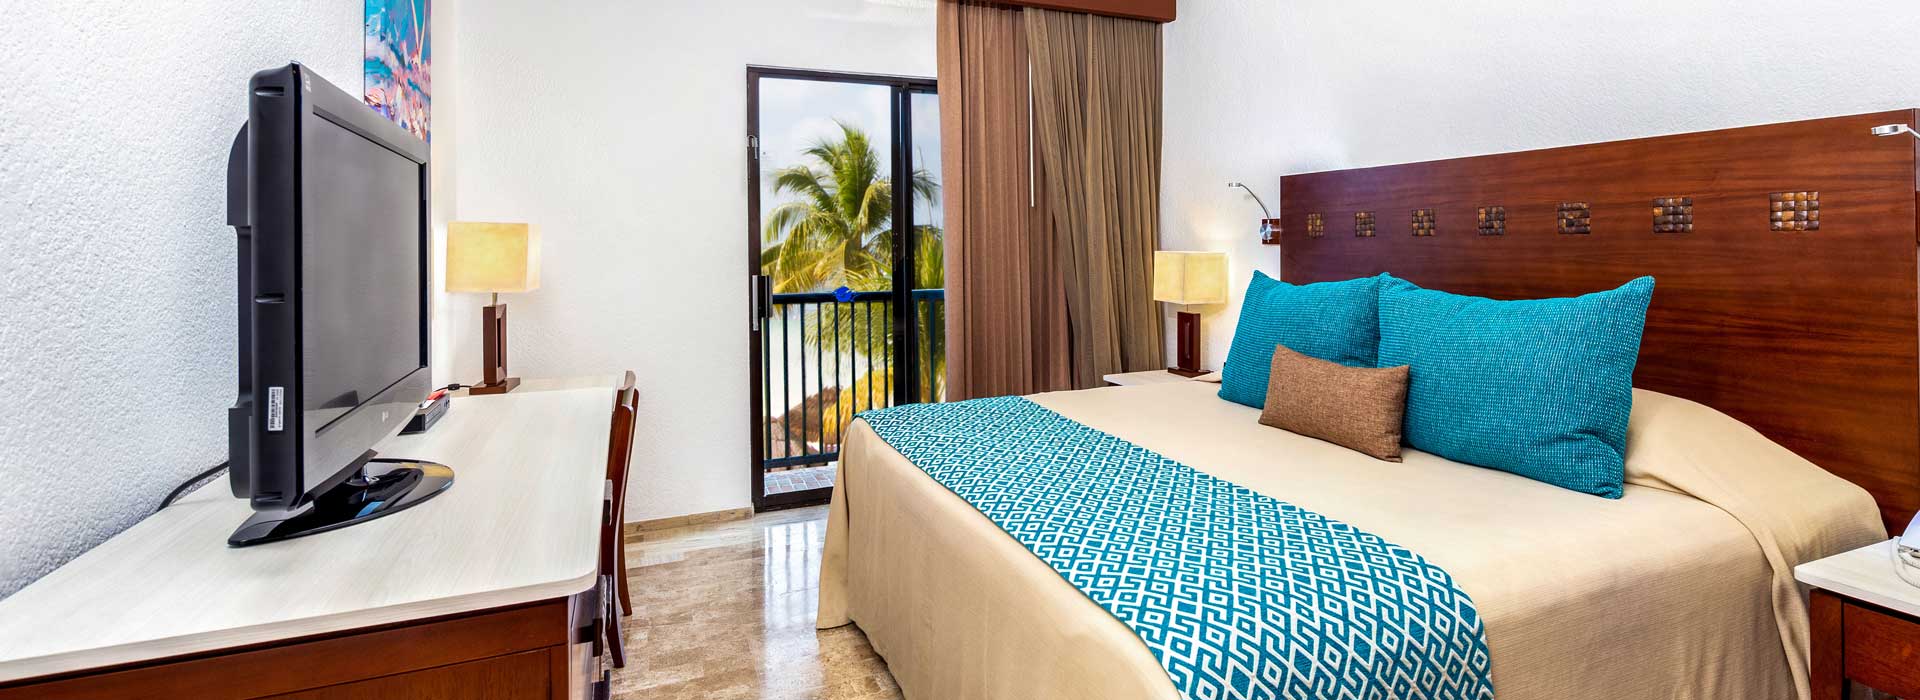 Fully equipped beachfront villas in Cancun